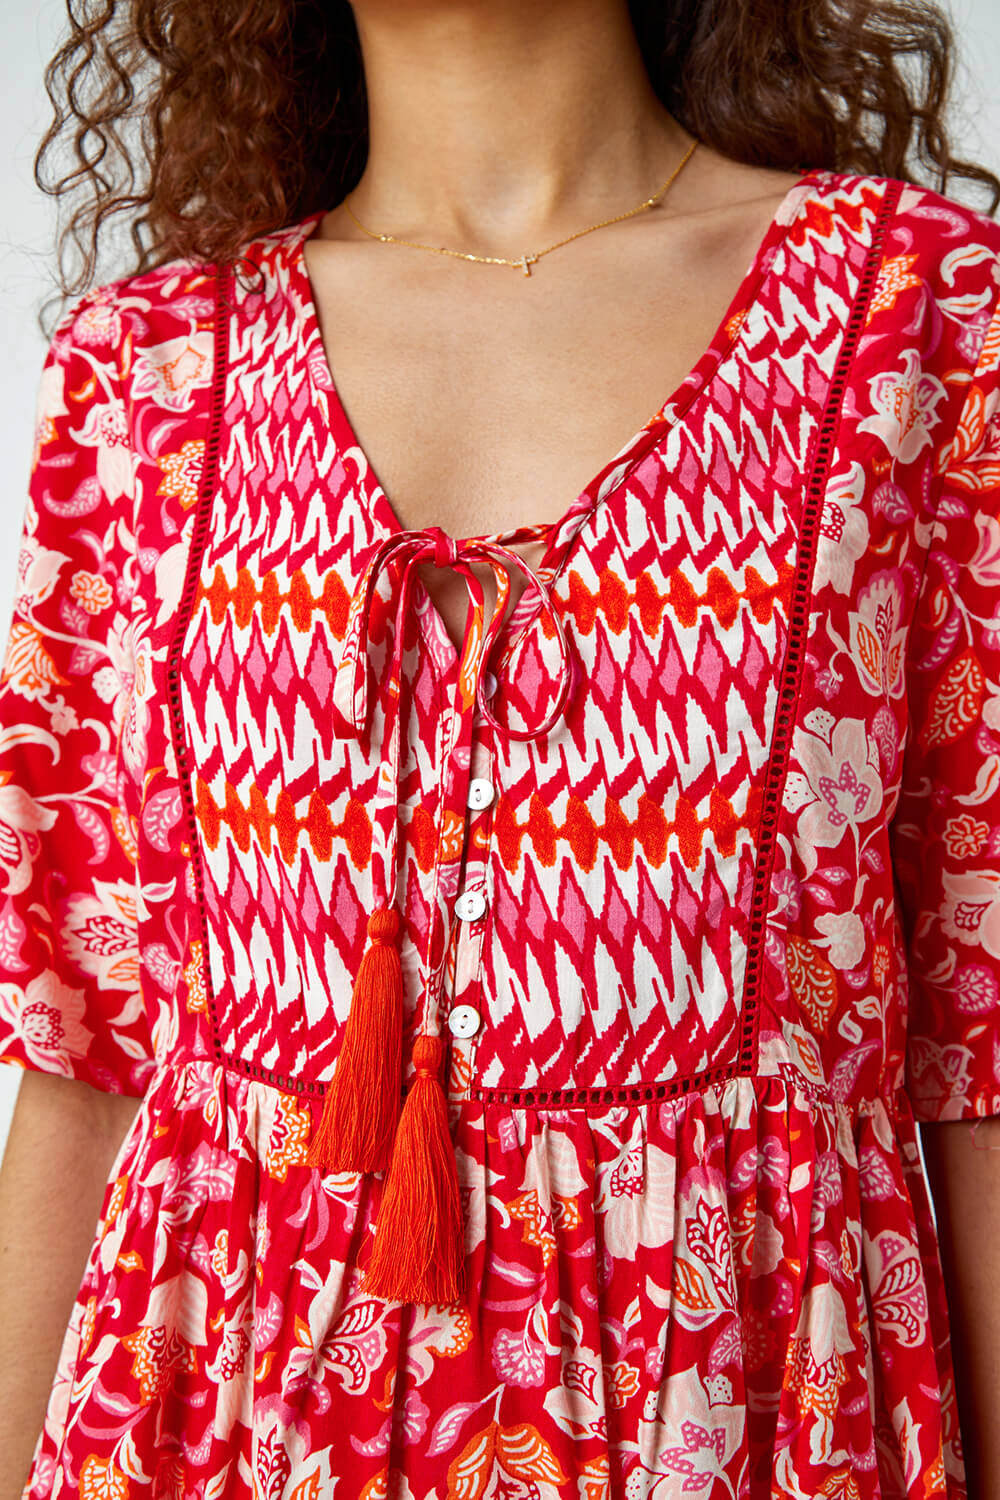 Red Floral Border Tie Smock Top, Image 5 of 5